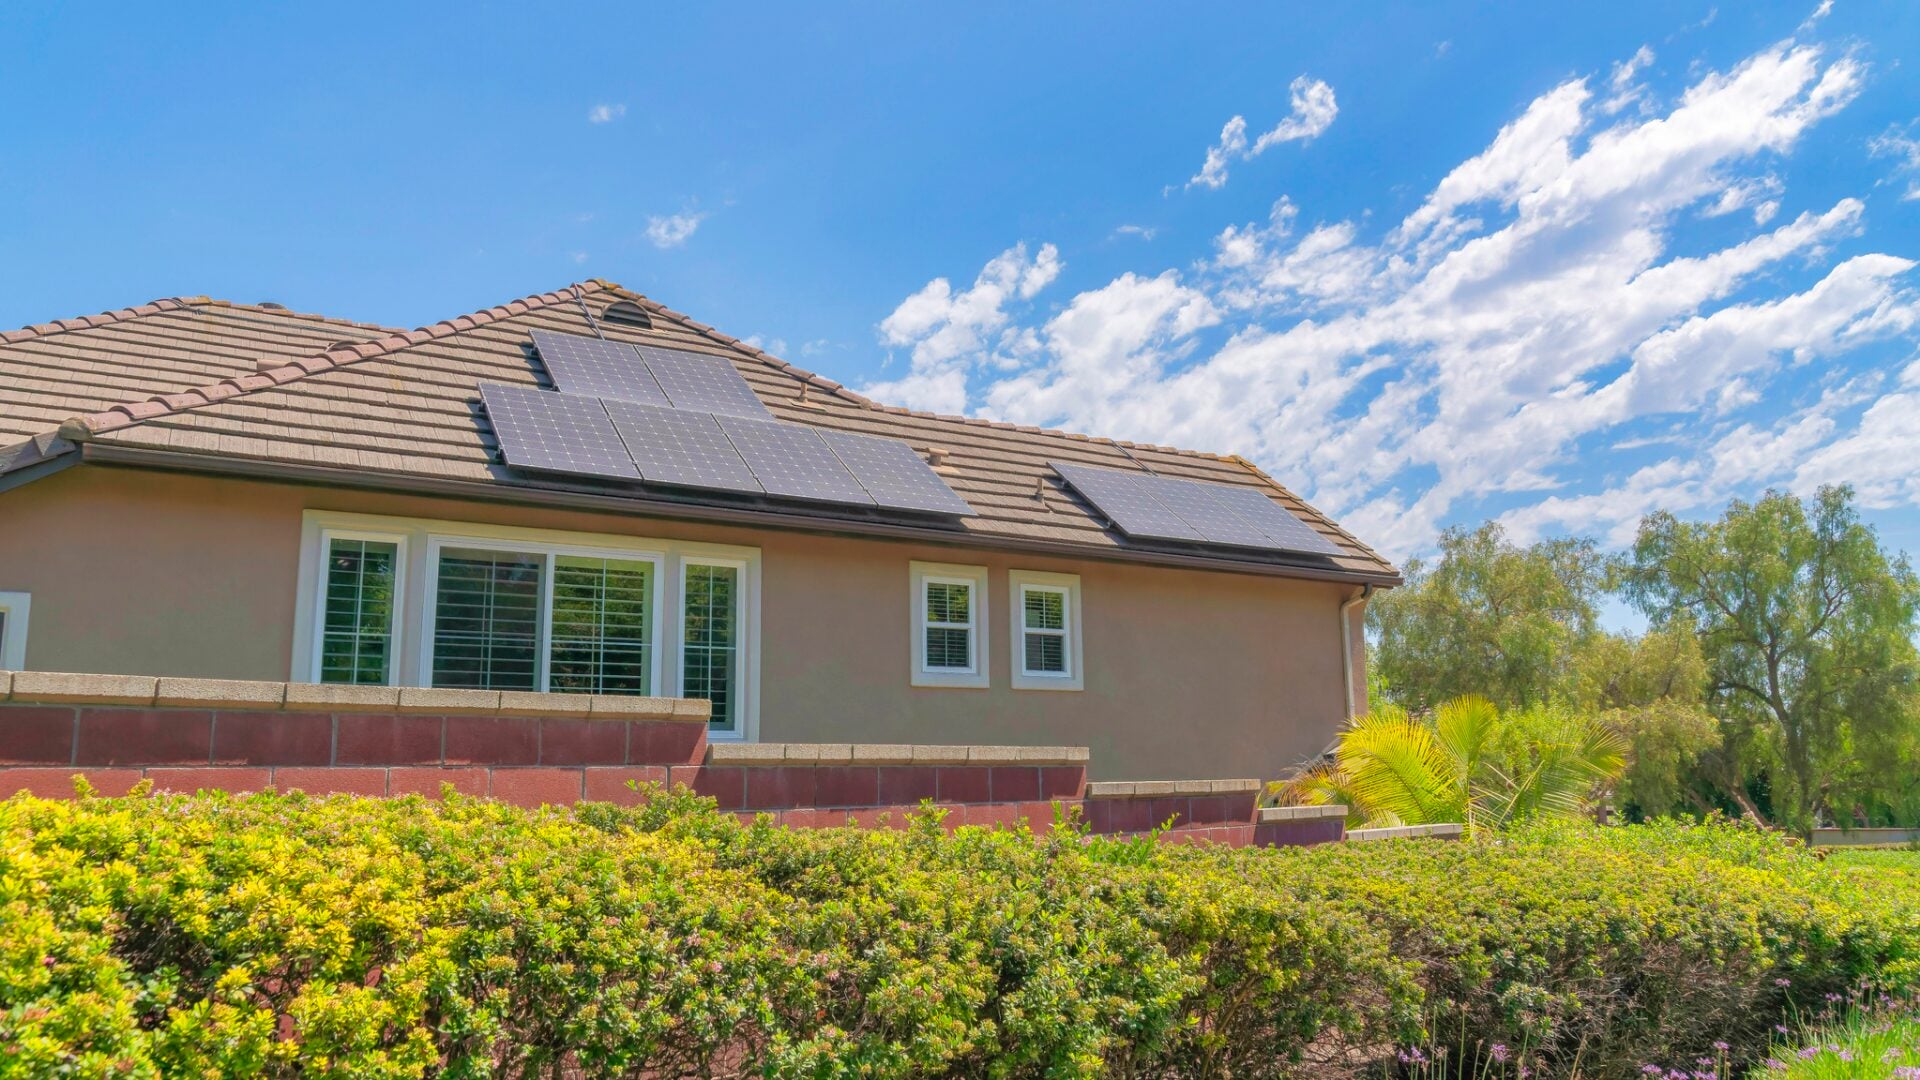 A house in Ladera Ranch, California that is powered by solar energy.